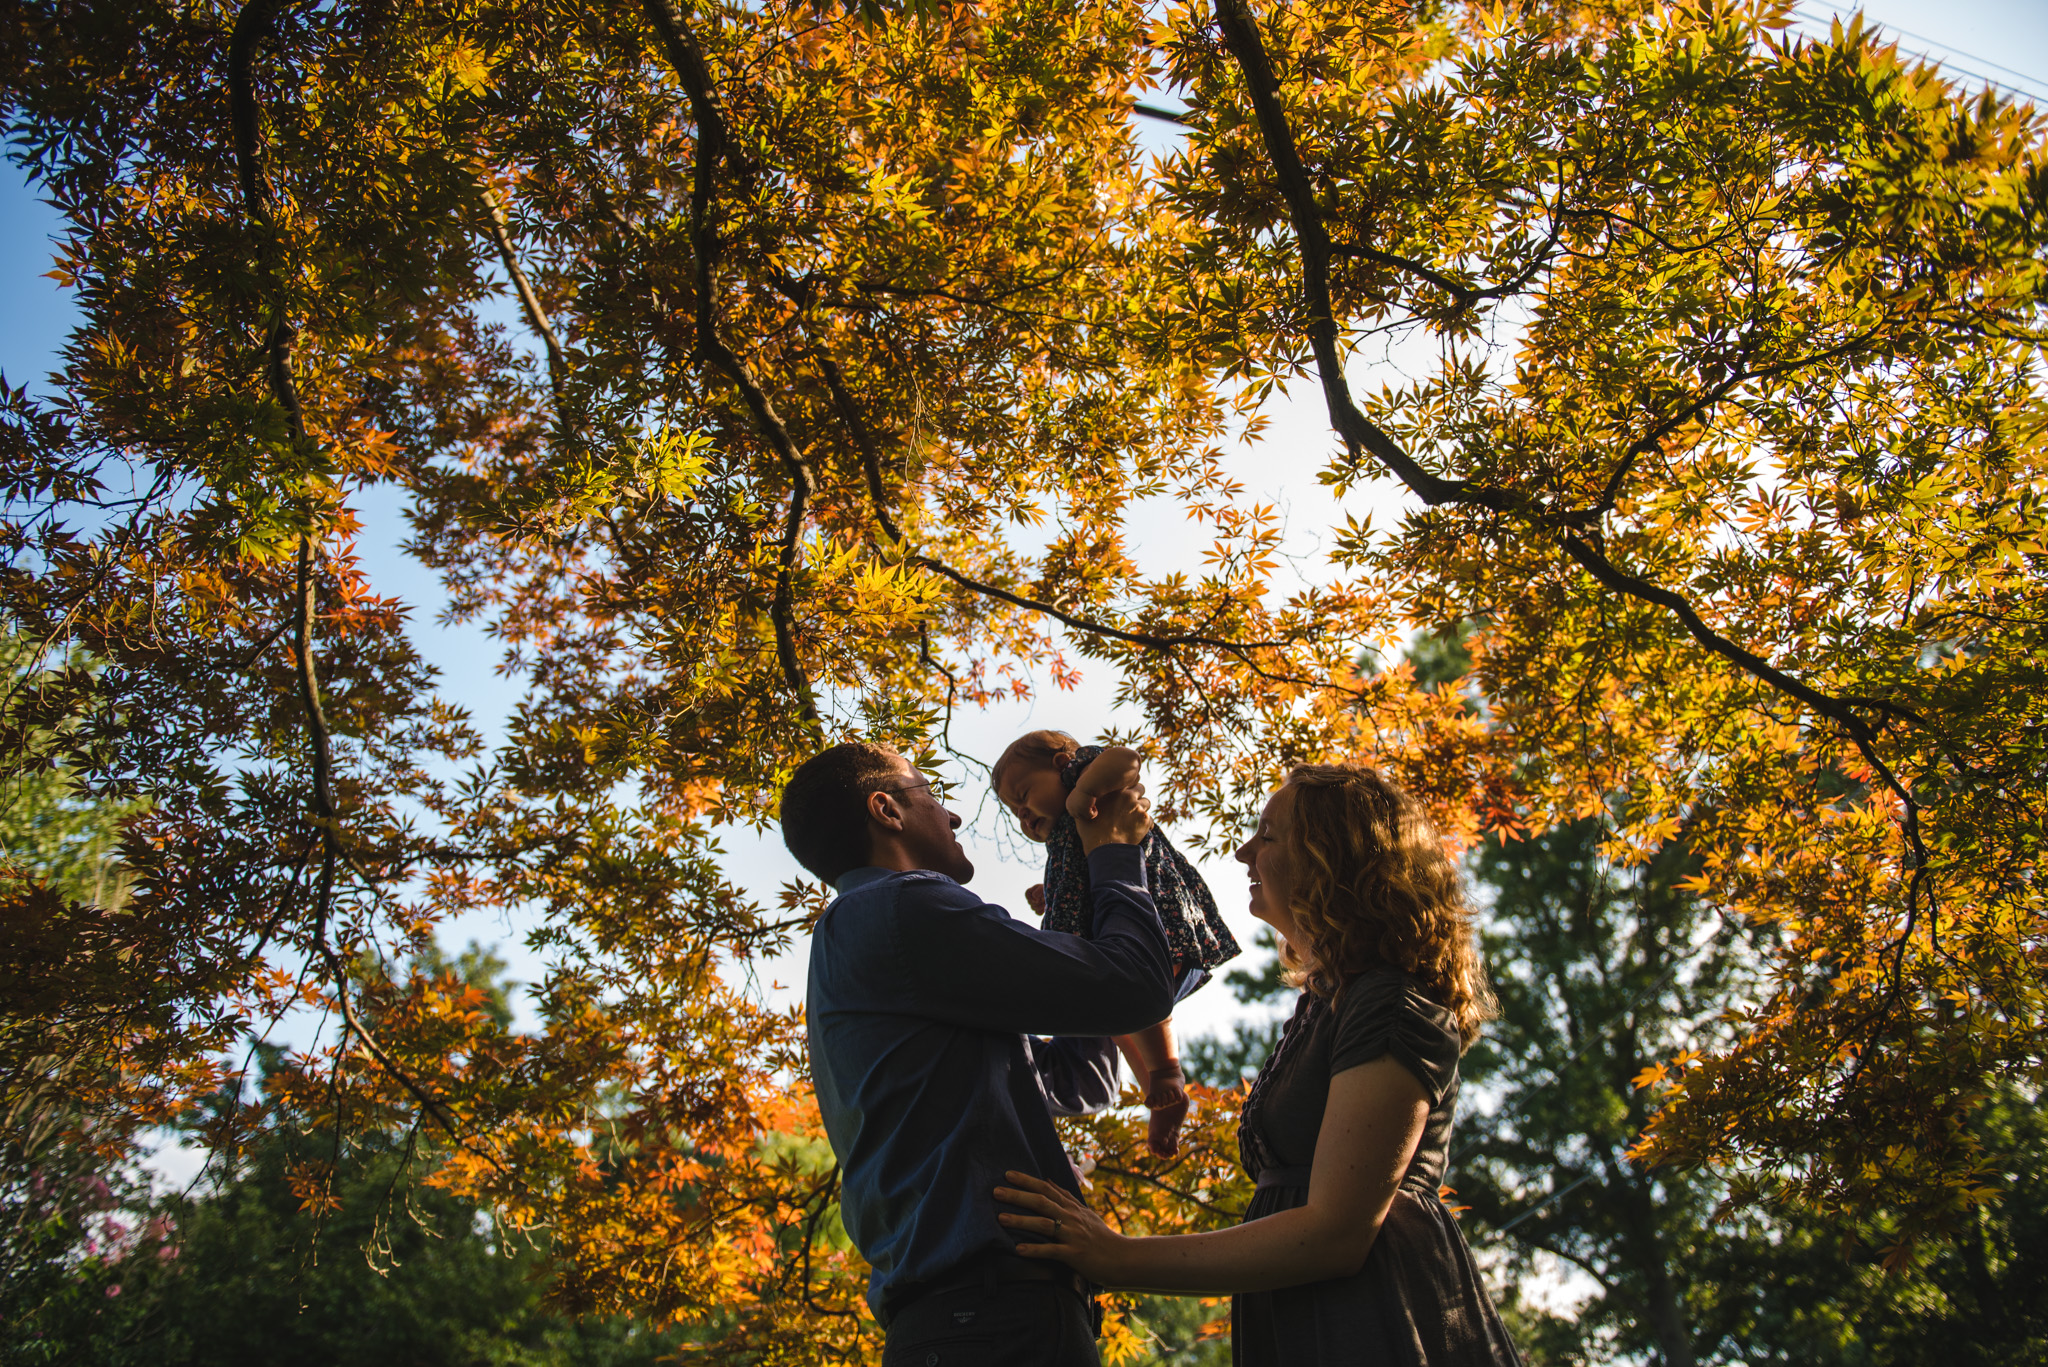 A husband and wife hold their baby girl under a beautiful oak tree in the fall